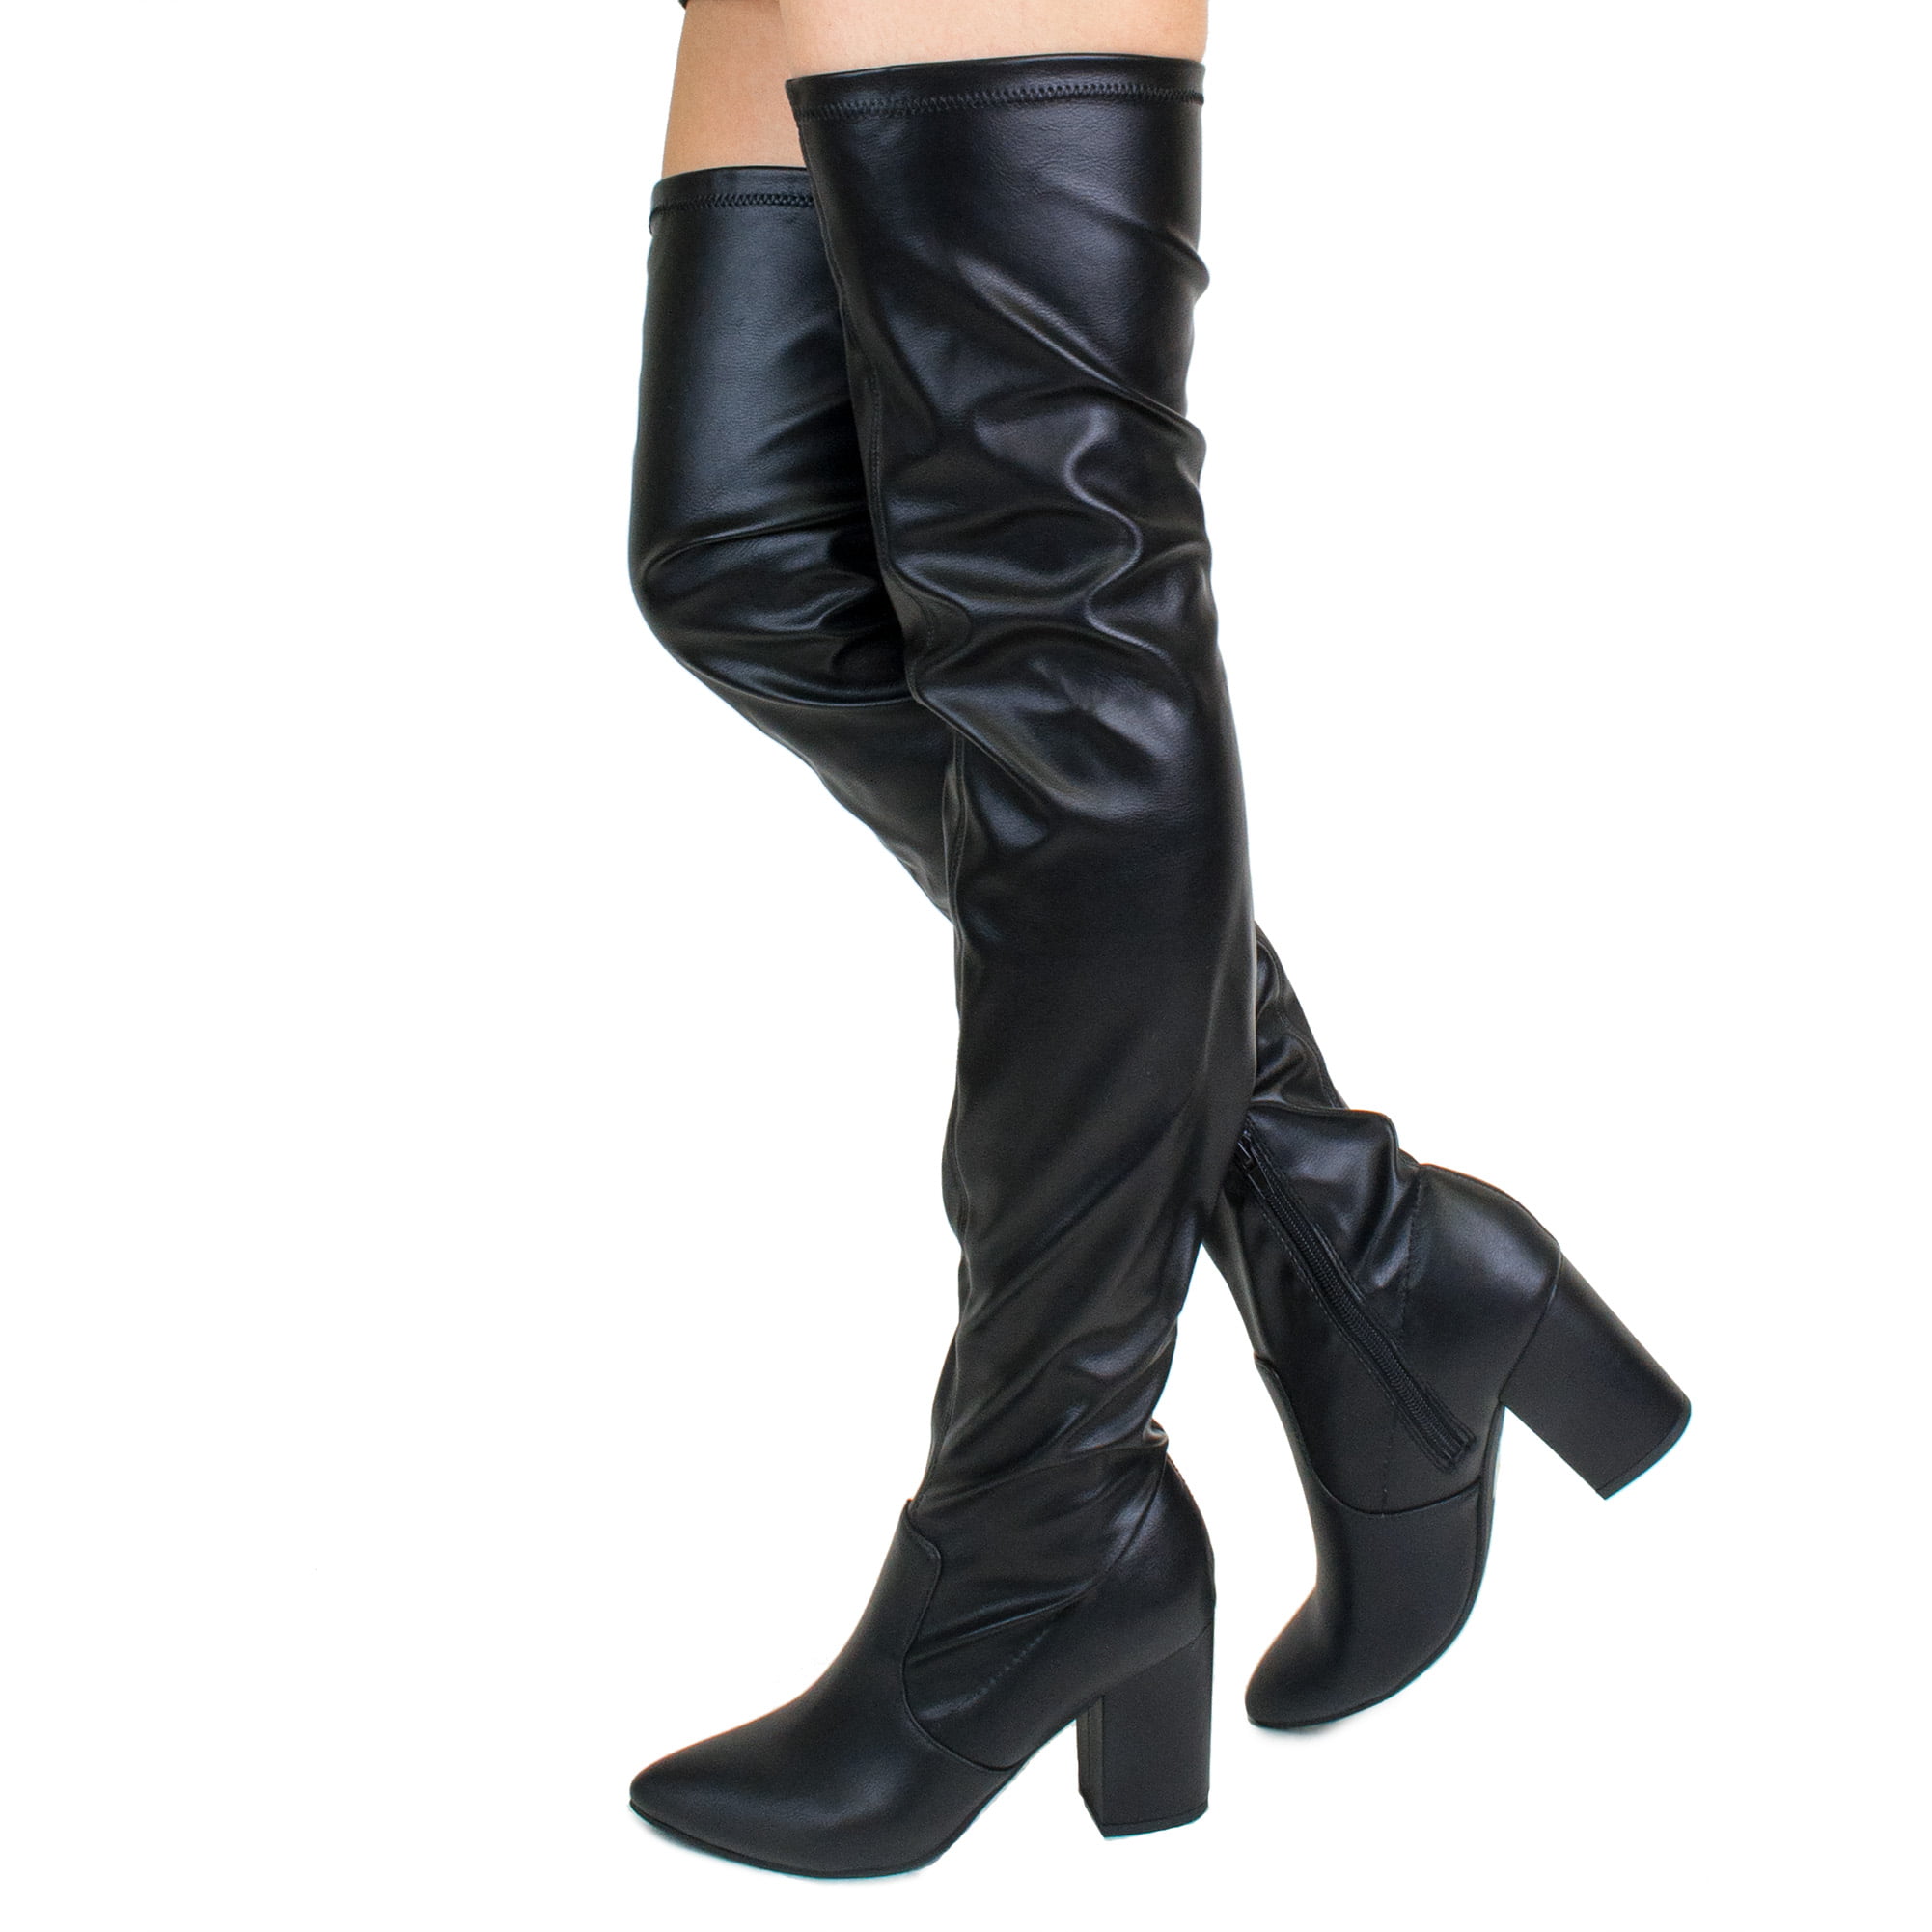 Women Ladies Over The Knee Boots Stretch Party Low Heel Block Thigh Zipper Shoes 